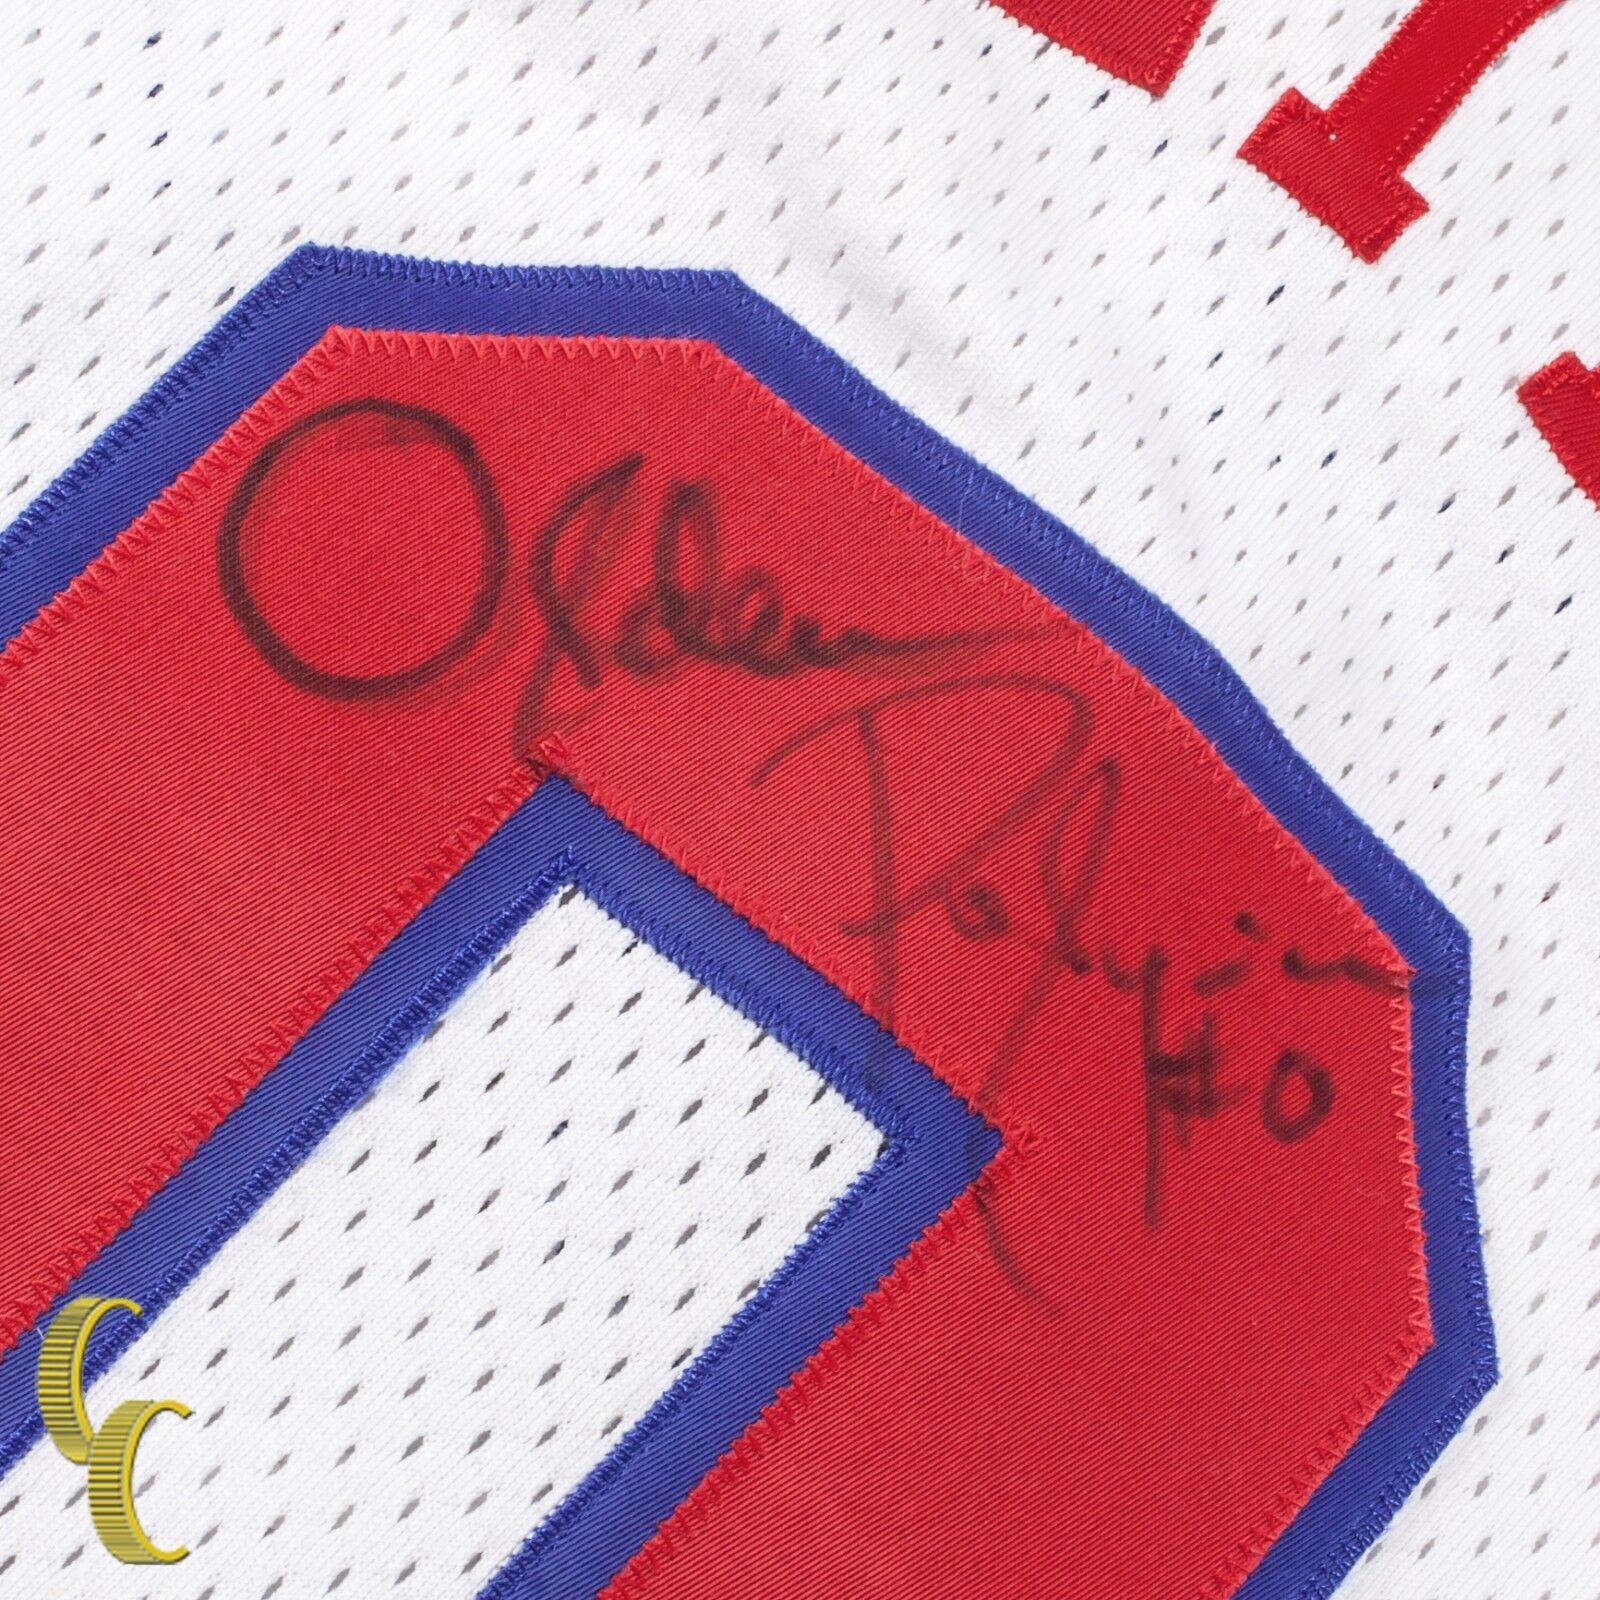 White Los Angeles Clippers Jersey Signed by Olden Polynice (#0)